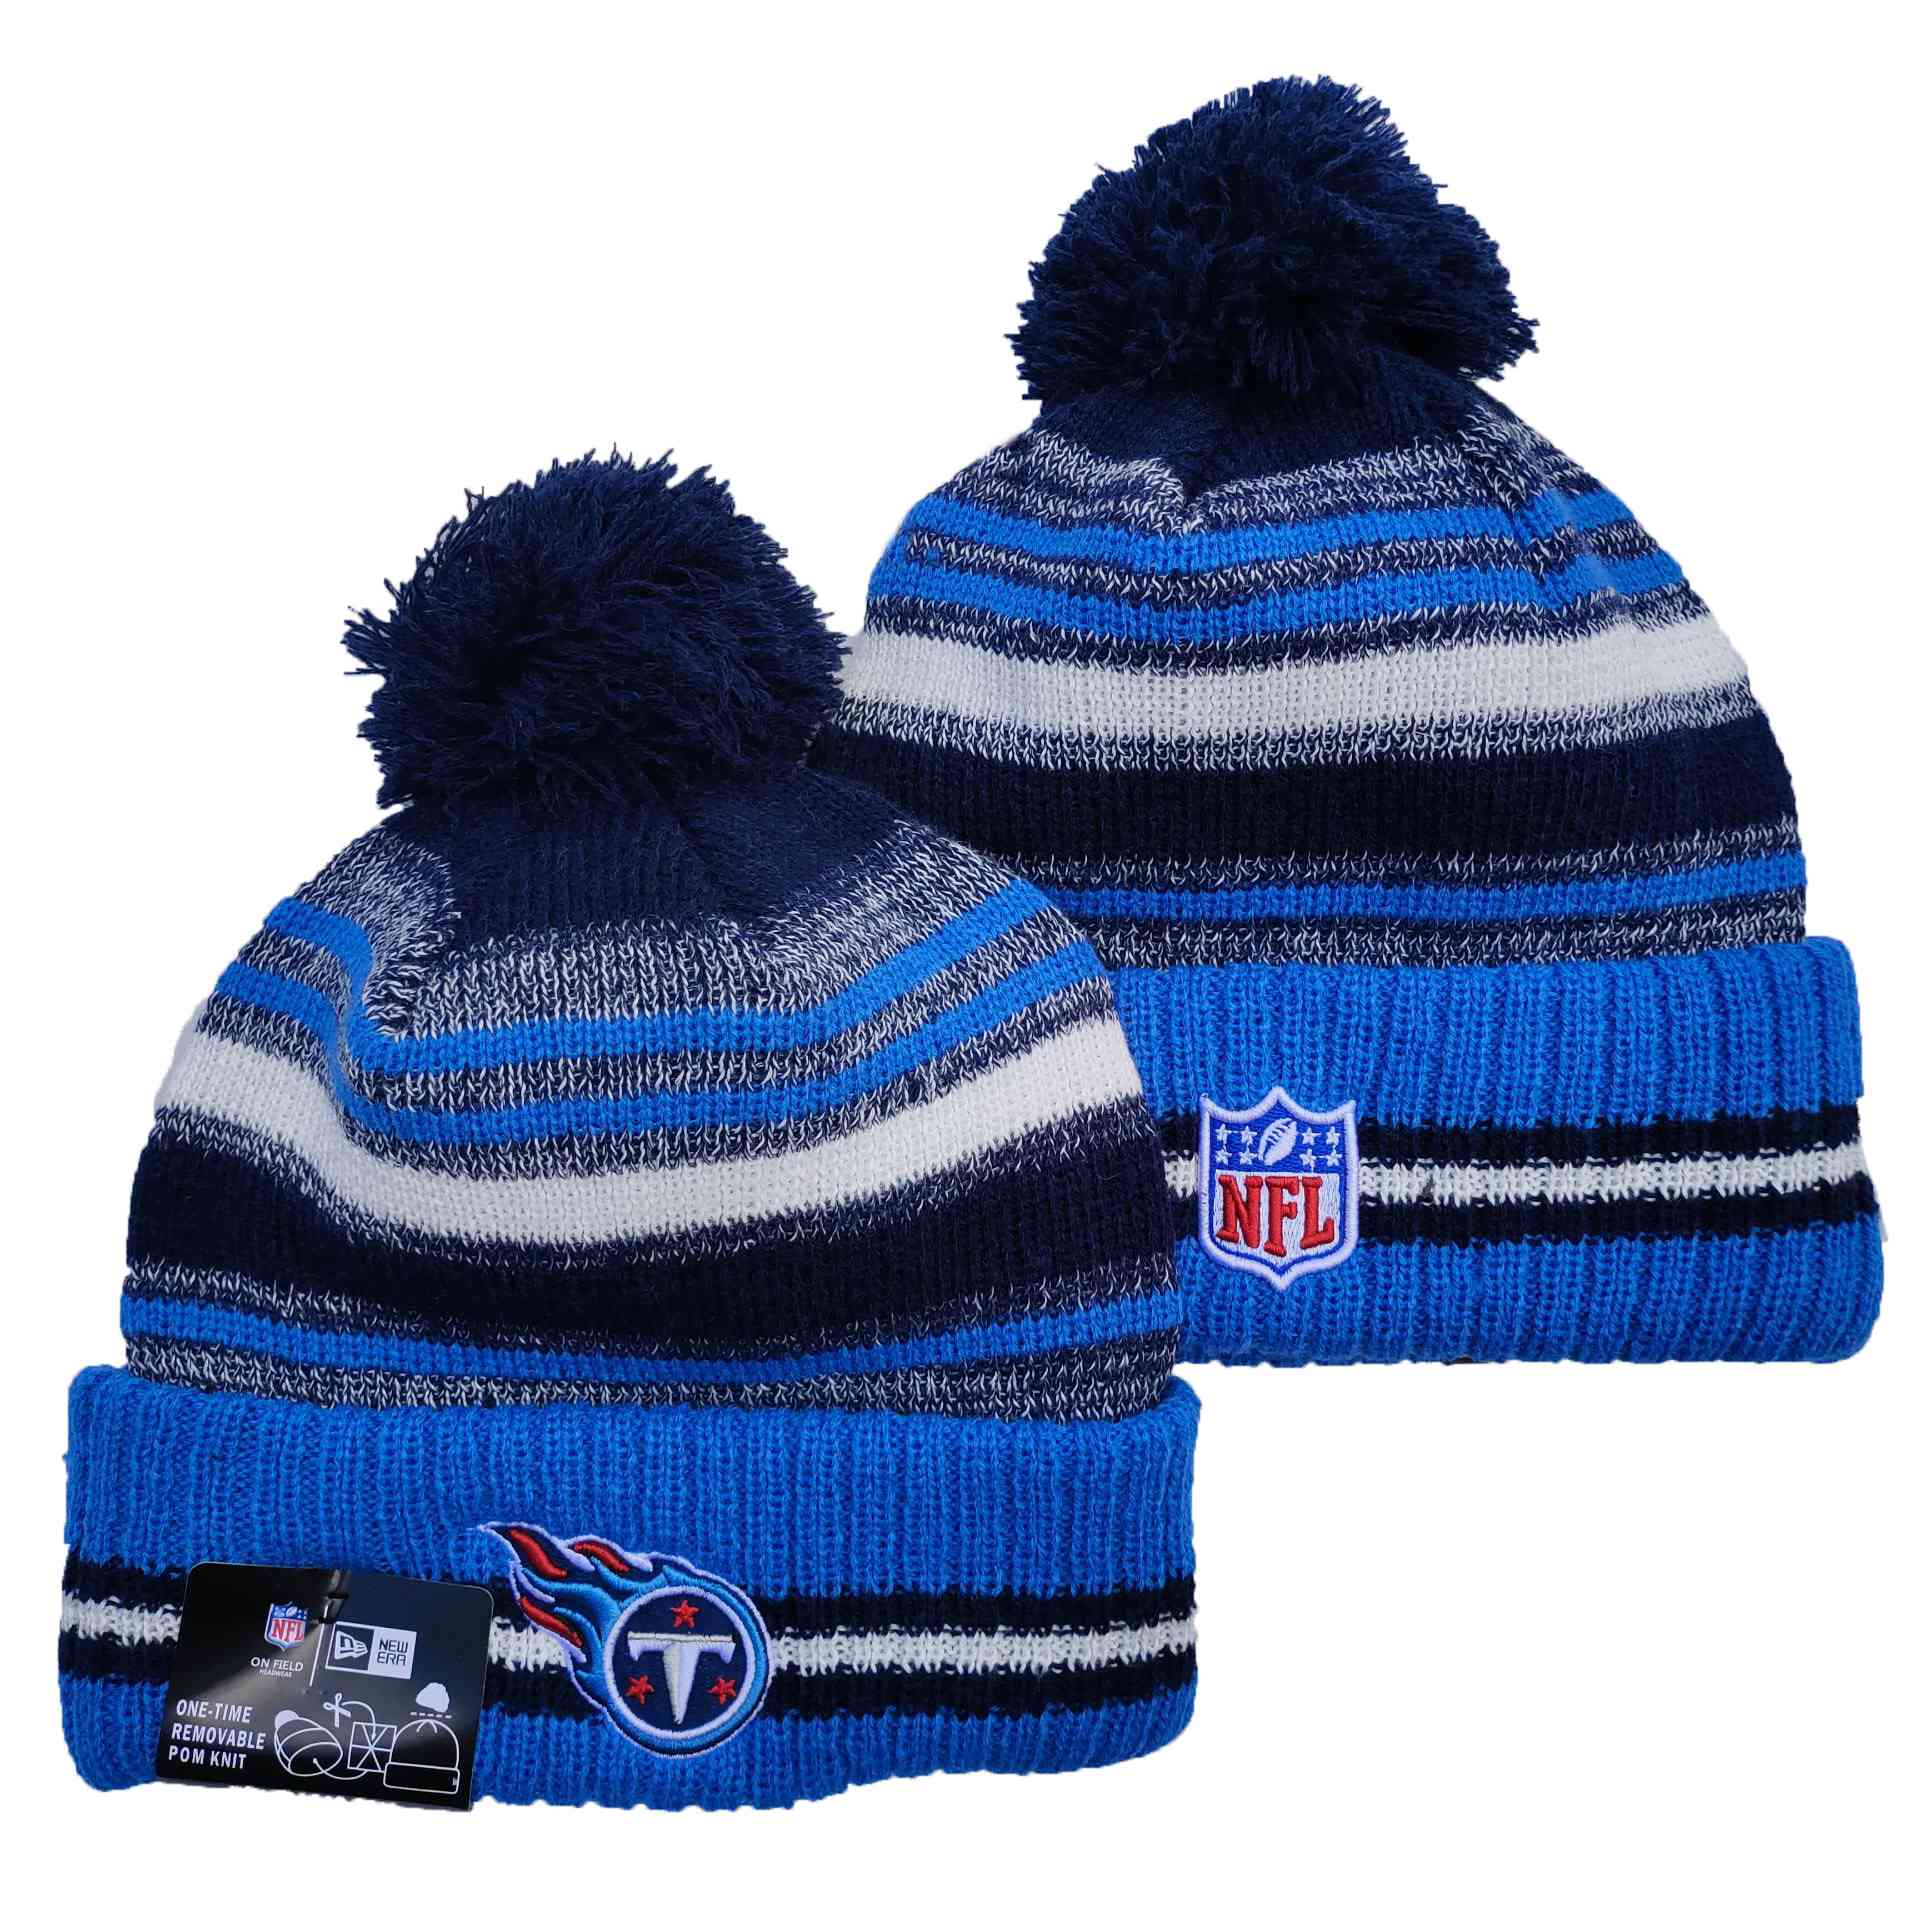 NFL Tennessee Titans Beanies Knit Hats-YD1316